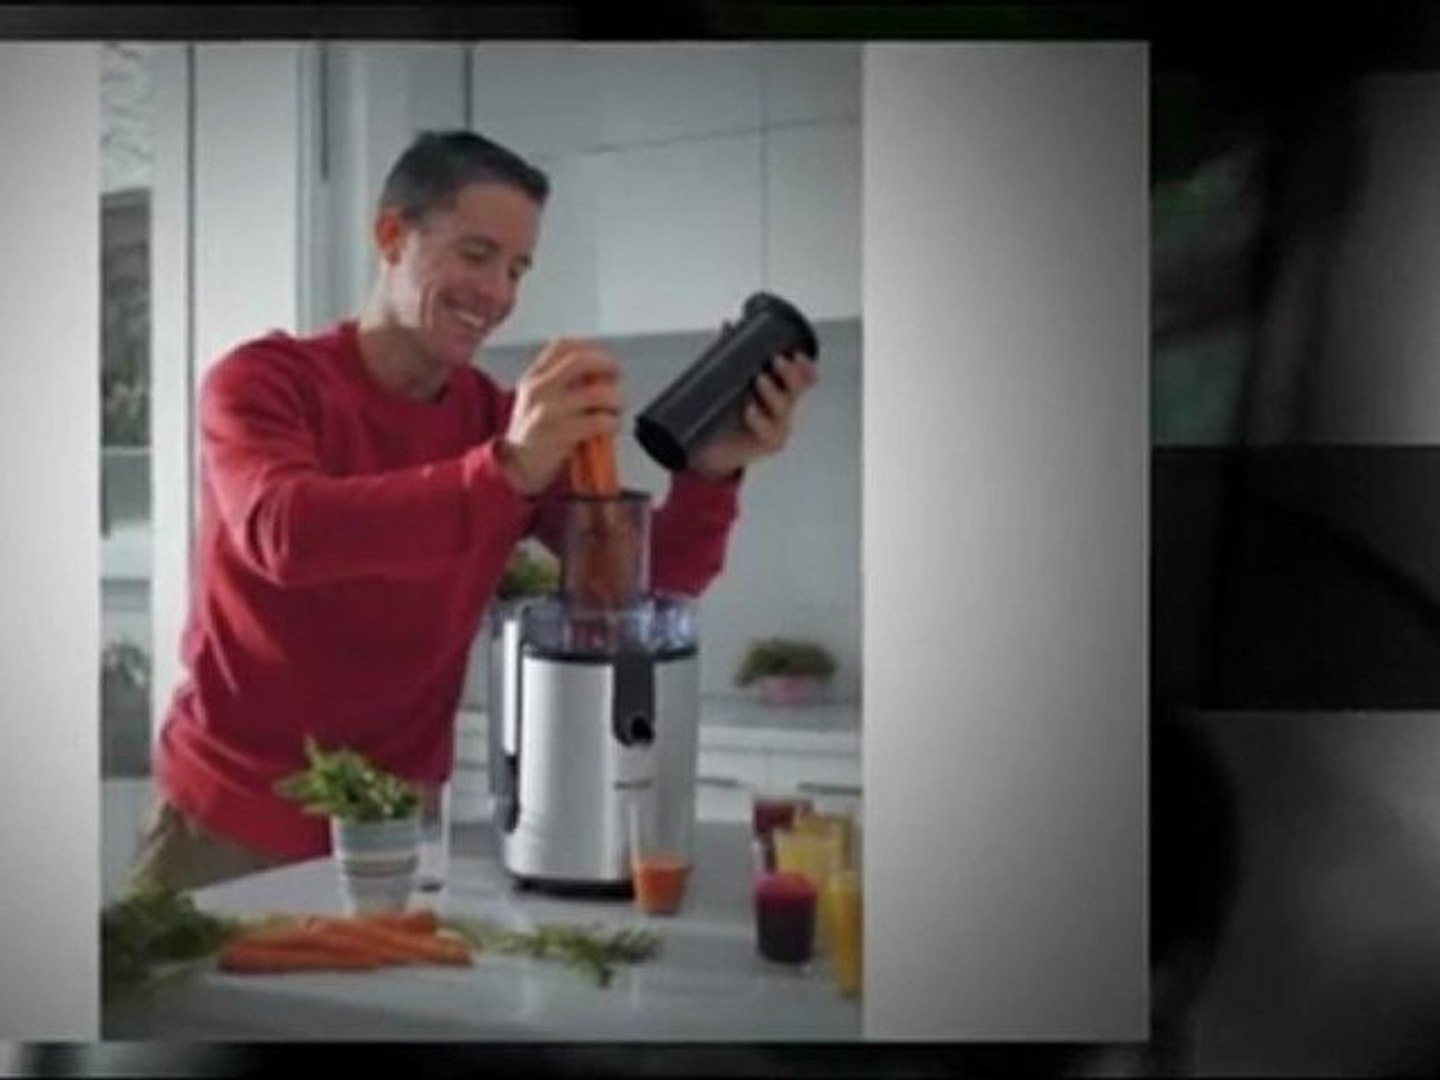 Philips hr1861 Aluminium Whole Fruit Juicer Review - video Dailymotion